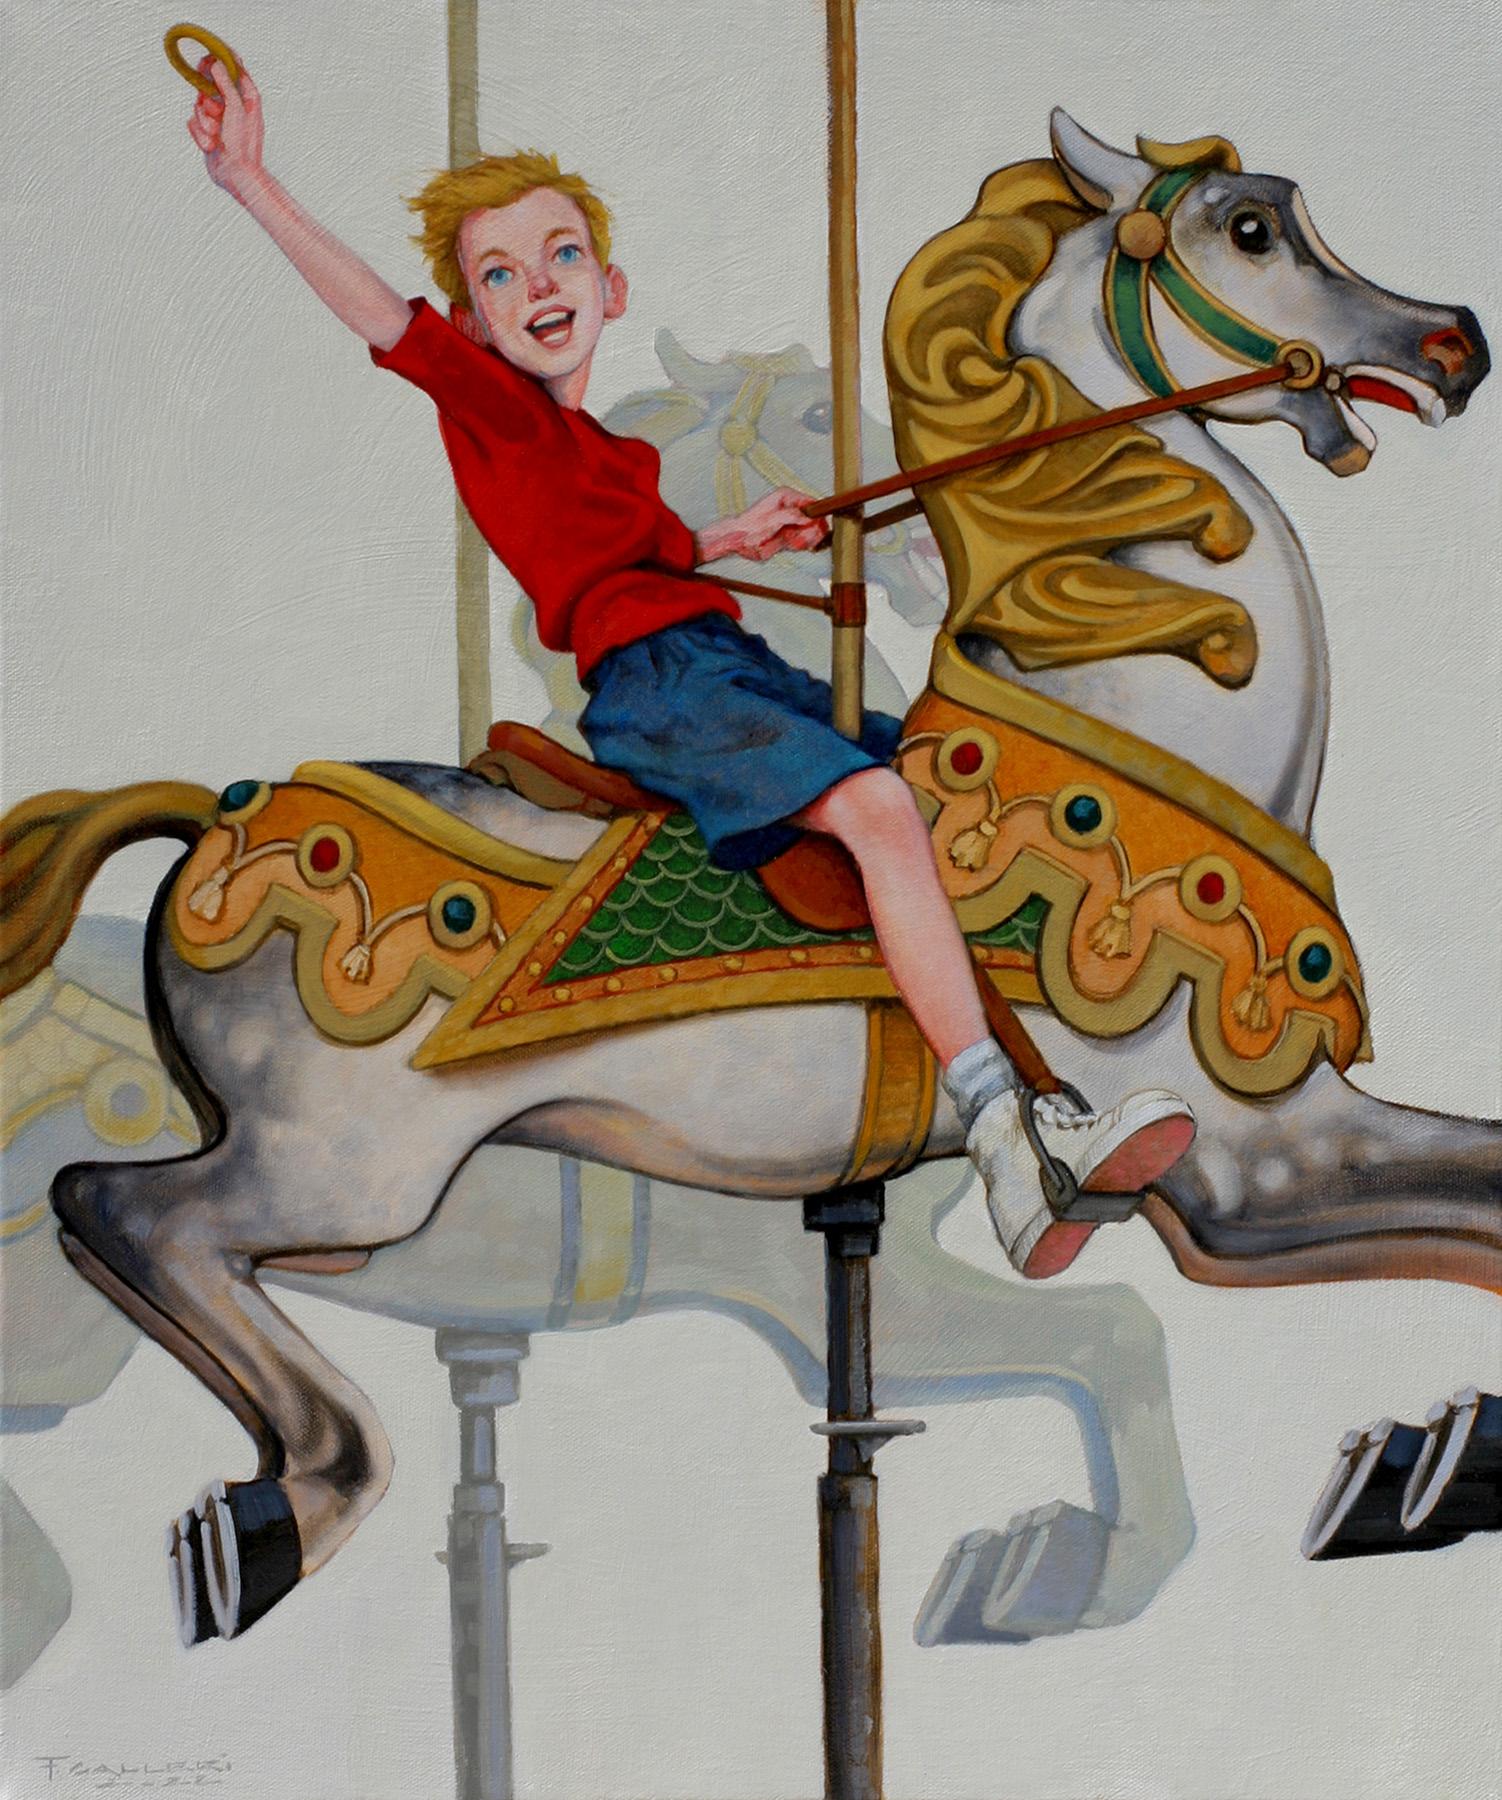 Fred Calleri Figurative Painting - "Tenth Try!" Boy in red and blue riding a horse on a carousel. 